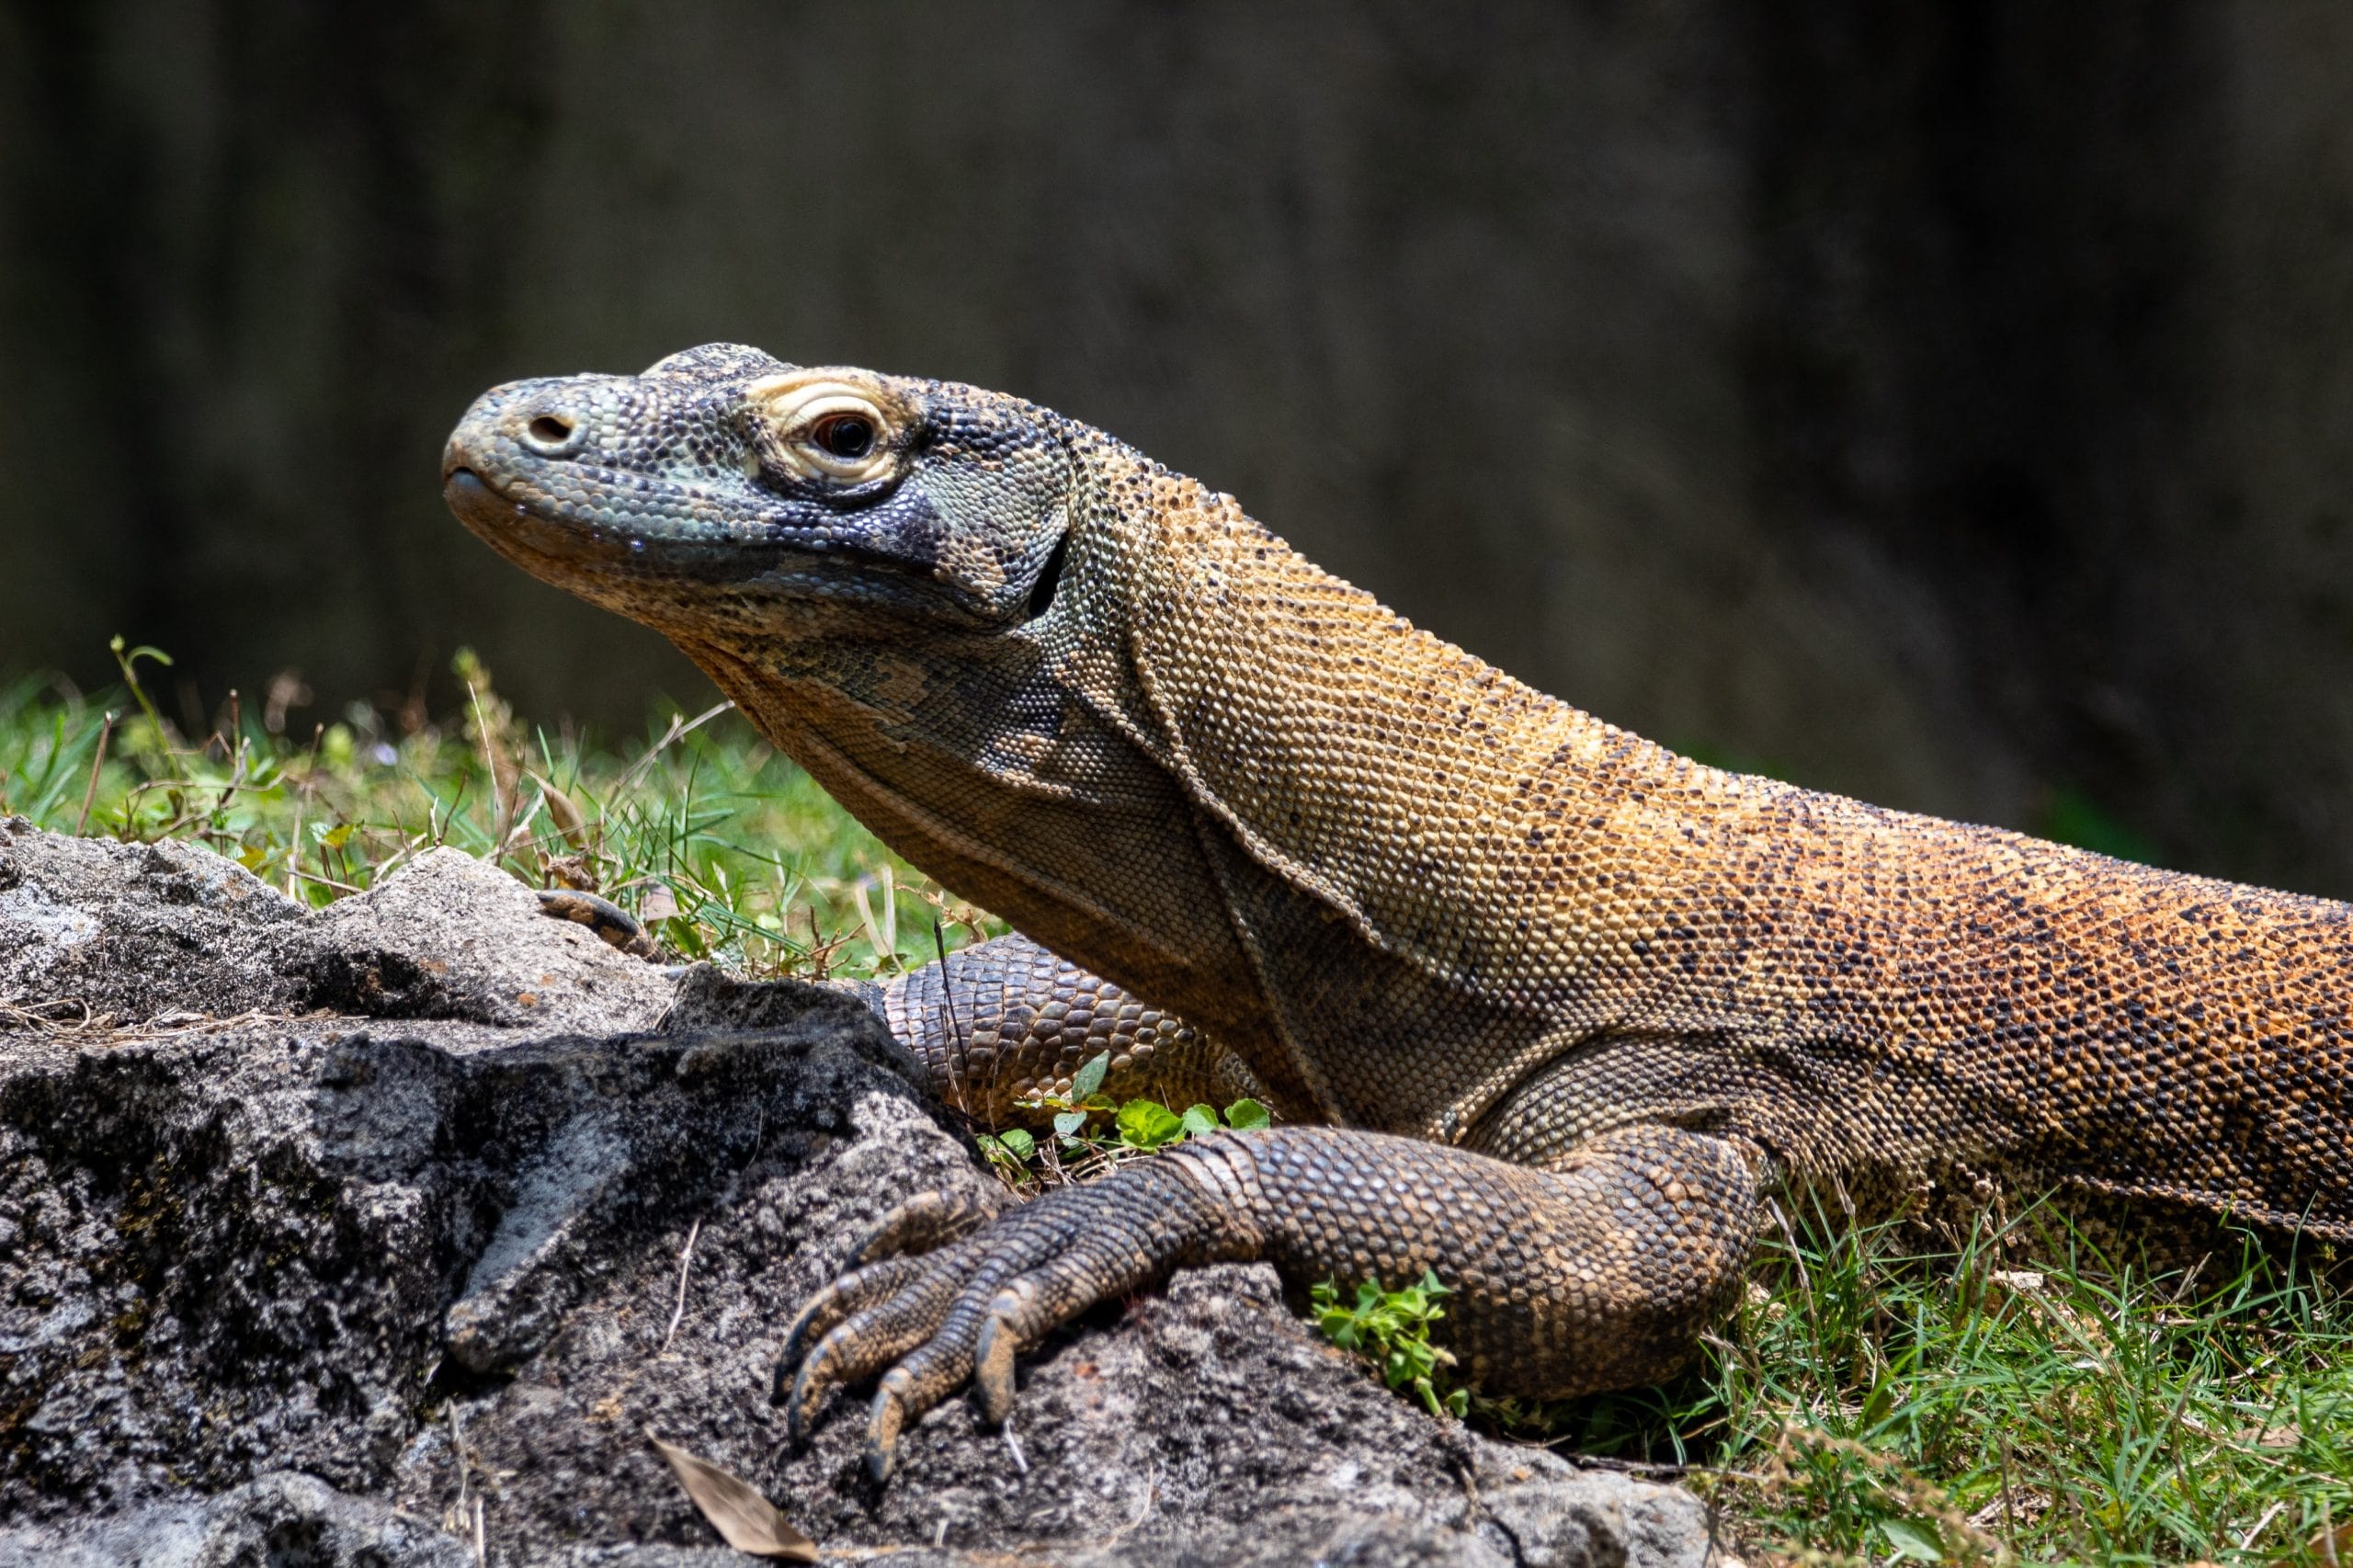 Indonesia considers the largest lizard in the world to be one of its national symbols. What is its name scaled